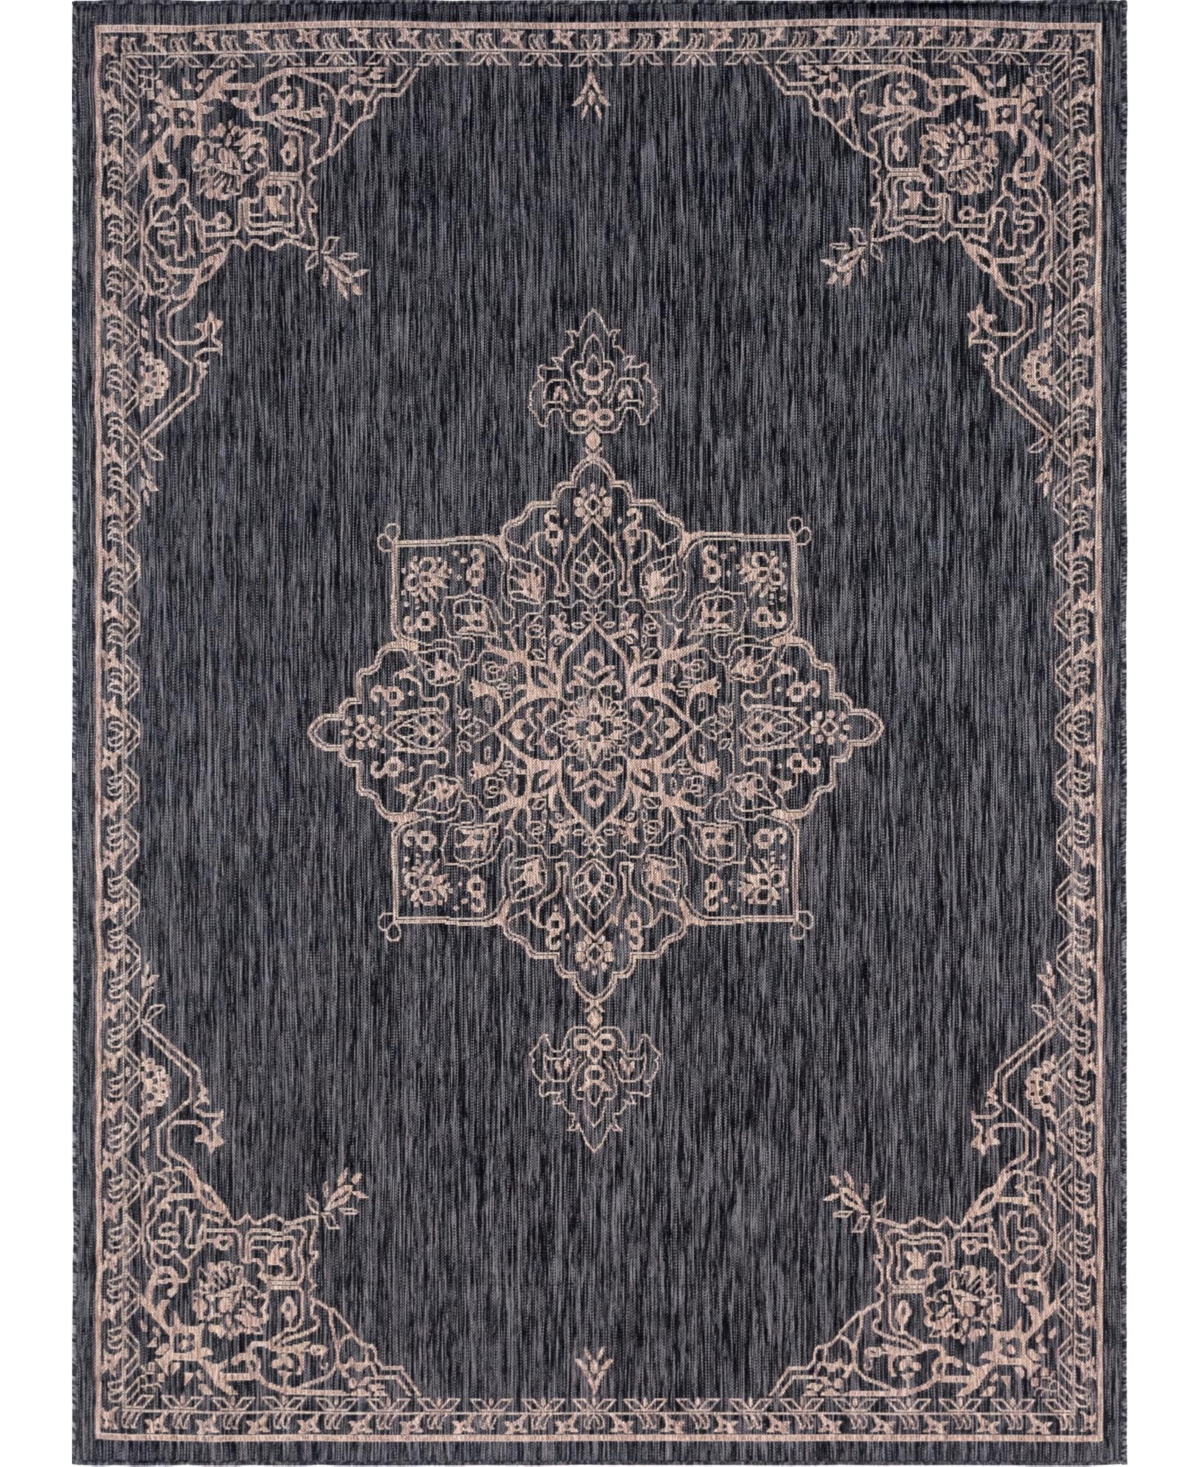 Bayshore Home Outdoor Bh Pashio Traditional Ii Antique 7' X 10' Area Rug In Charcoal